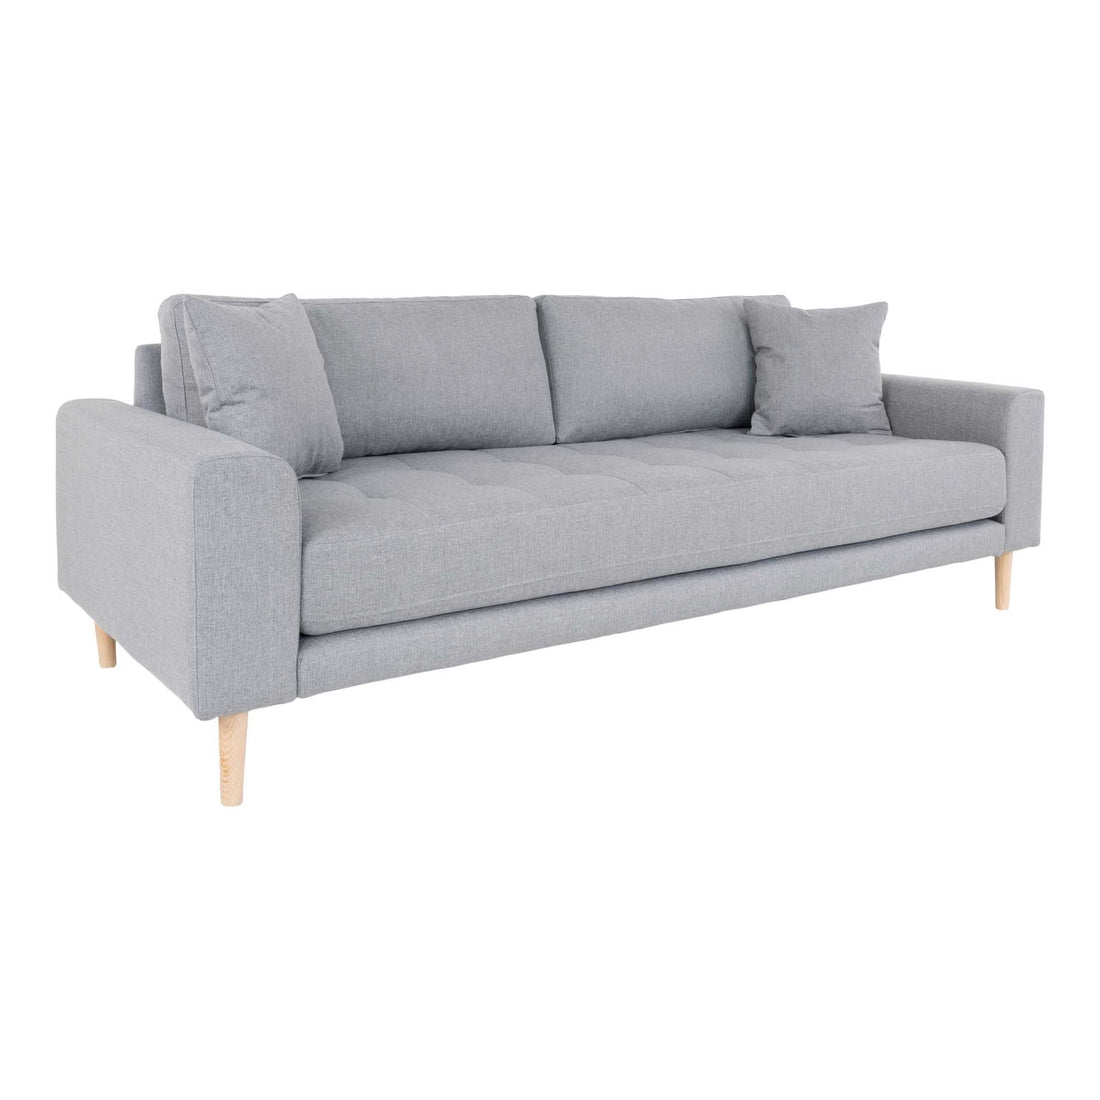 Lido 3 person sofa - 3 person sofa in light gray with two pillows and nature wooden legs, HN1001 - 1 - pcs